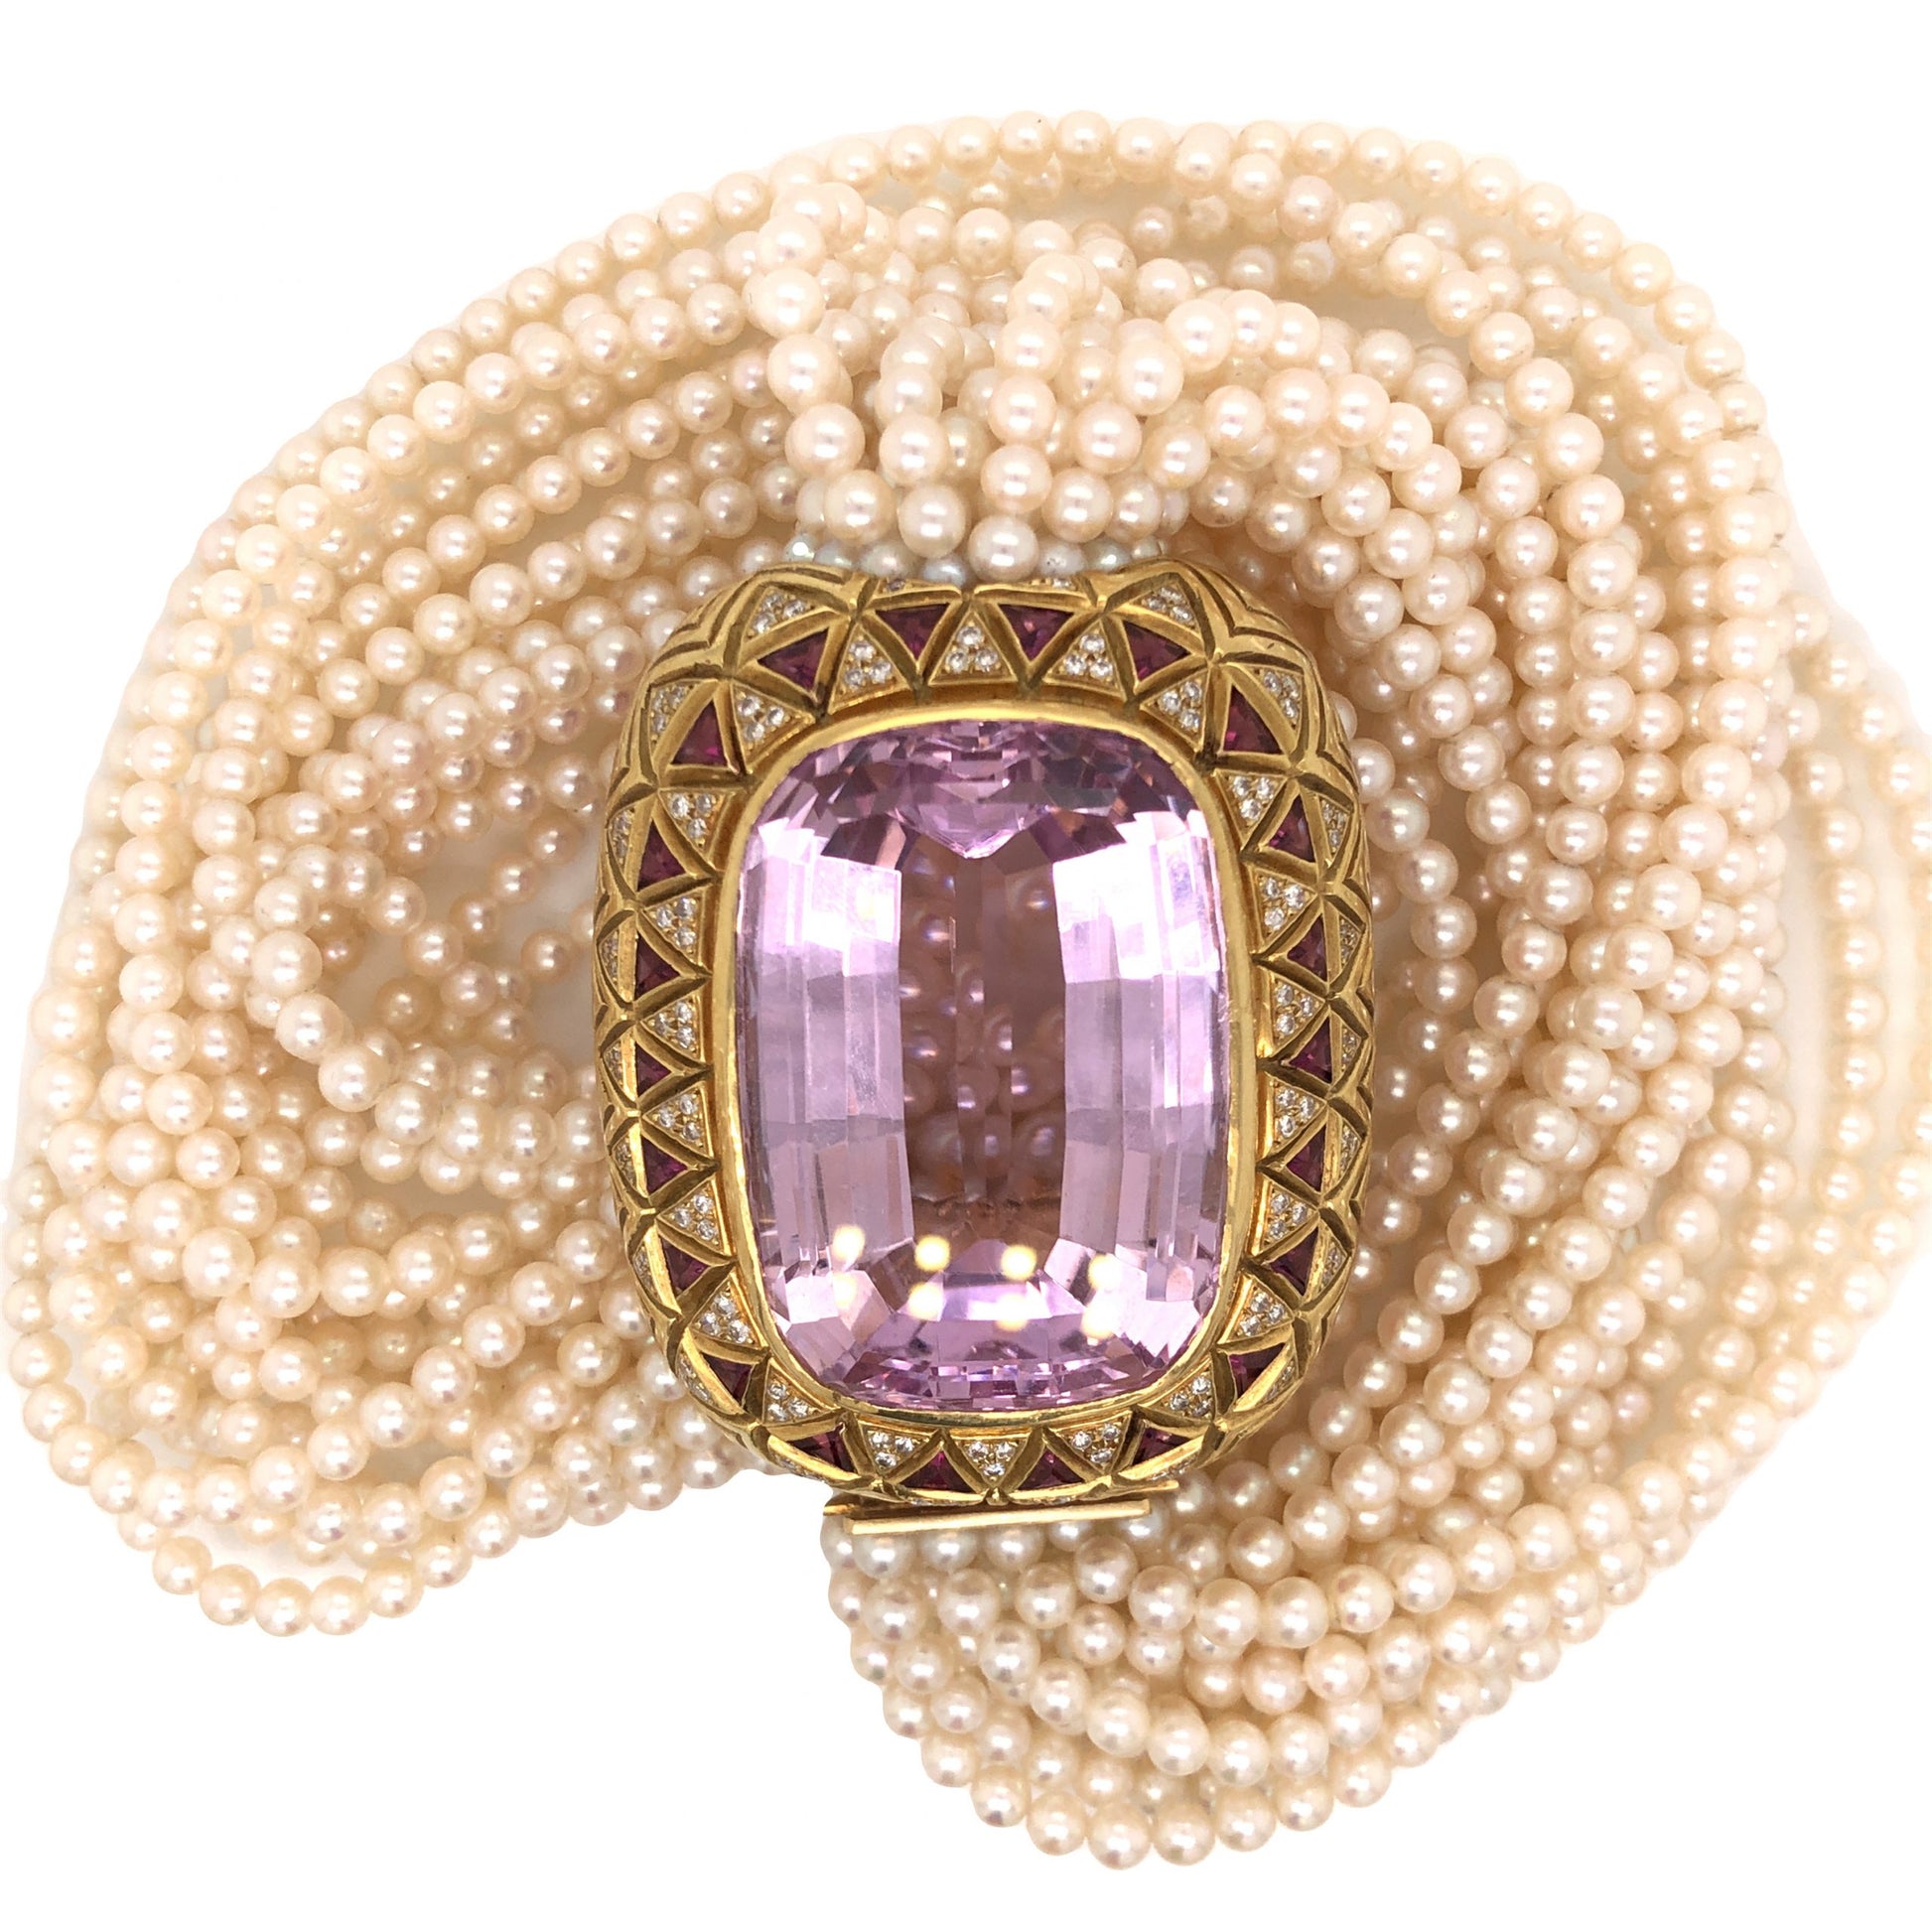 Kunzite Pendant Necklace w/ Diamonds & Pearls in 18k Yellow GoldComposition: Platinum Total Diamond Weight: 1.26ct Total Gram Weight: 177.4 g Inscription: 18k
      